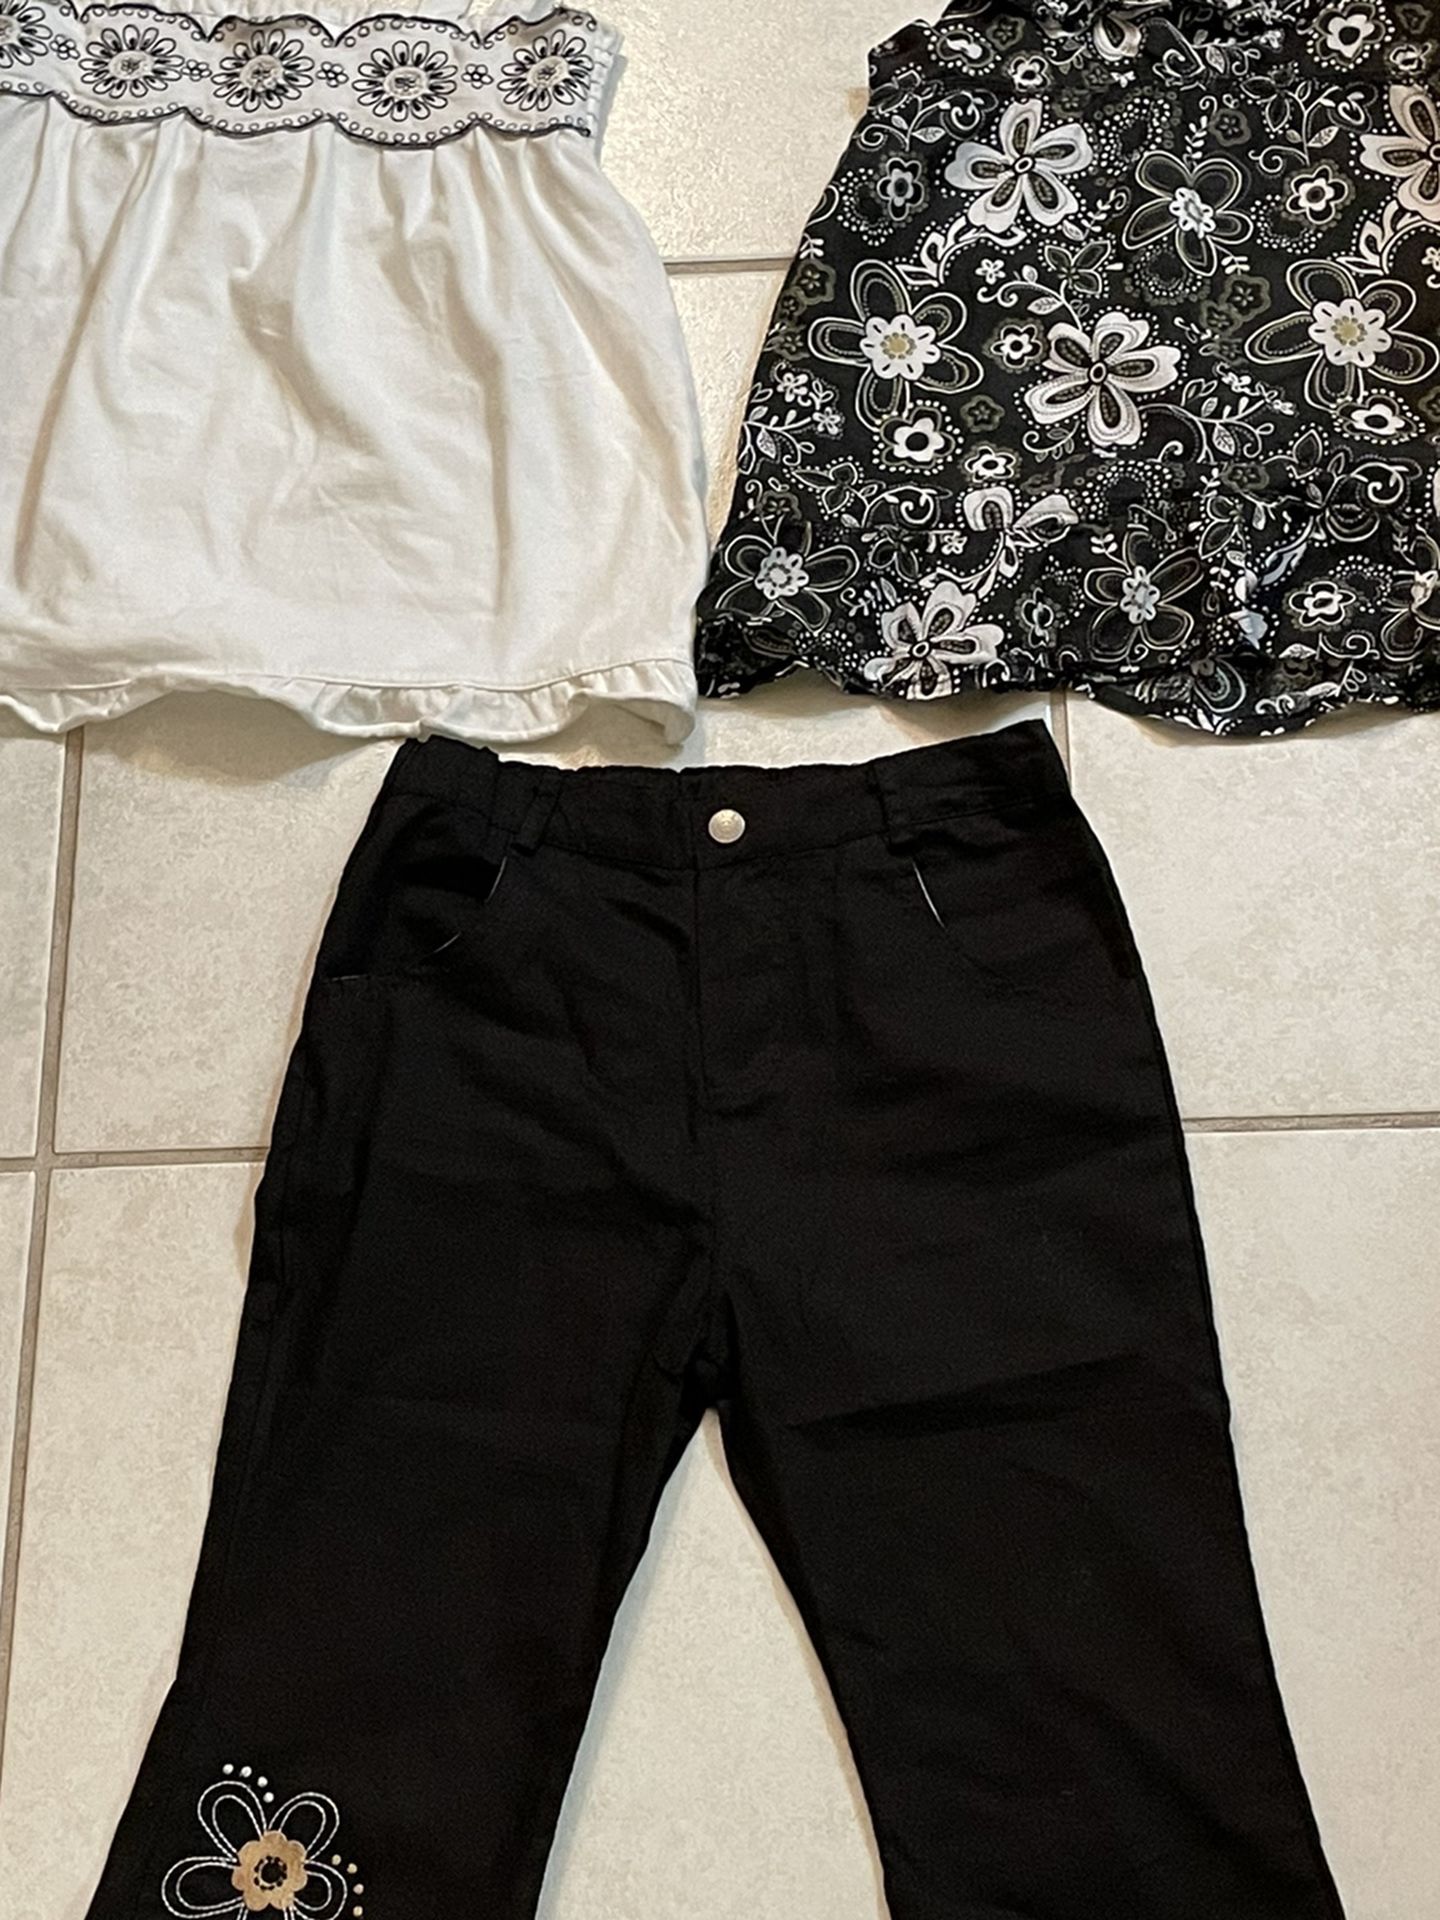 Girls size 6X outfit, two shirts one pass